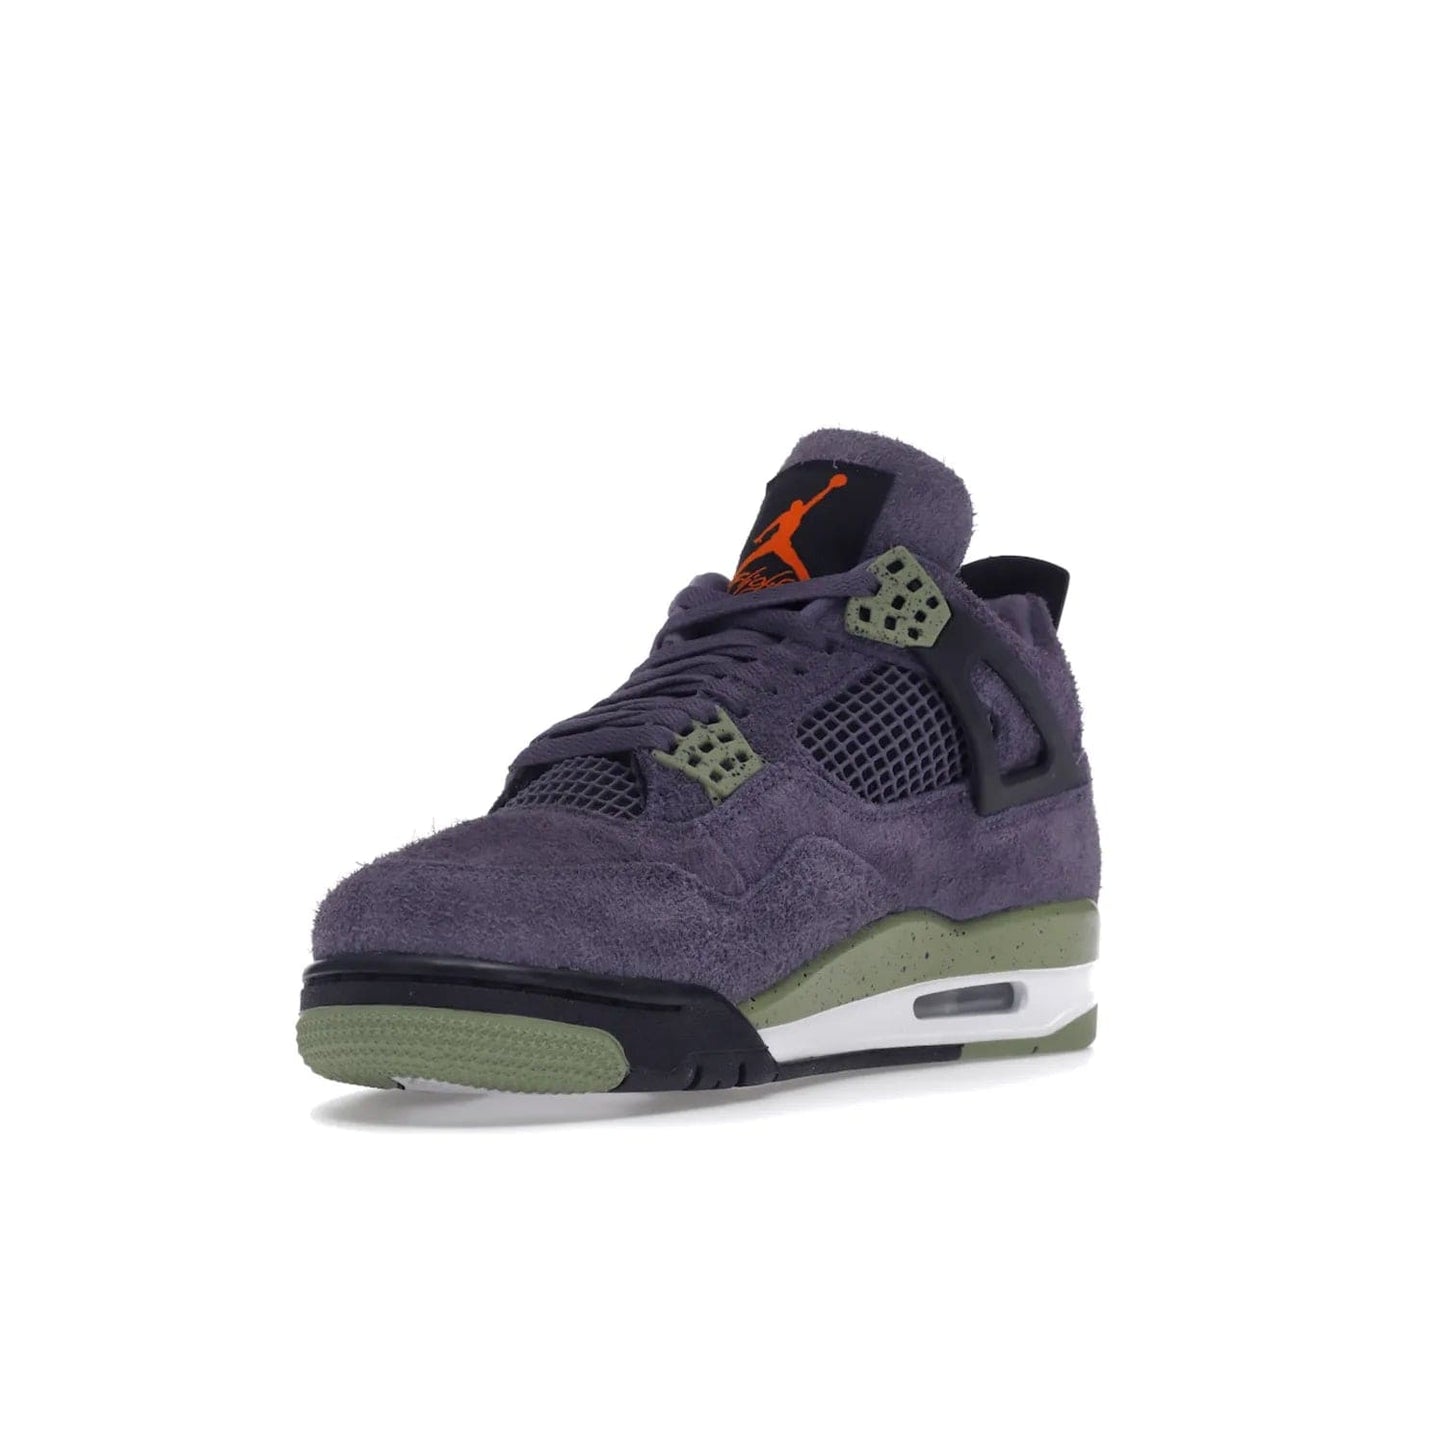 Jordan 4 Retro Canyon Purple (Women's) - Image 14 - Only at www.BallersClubKickz.com - New Air Jordan 4 Retro Canyon Purple W sneaker features shaggy purple suede, lime highlights & safety orange Jumpman branding. Classic ankle-hugging silhouette with modern colors released 15/10/2022.